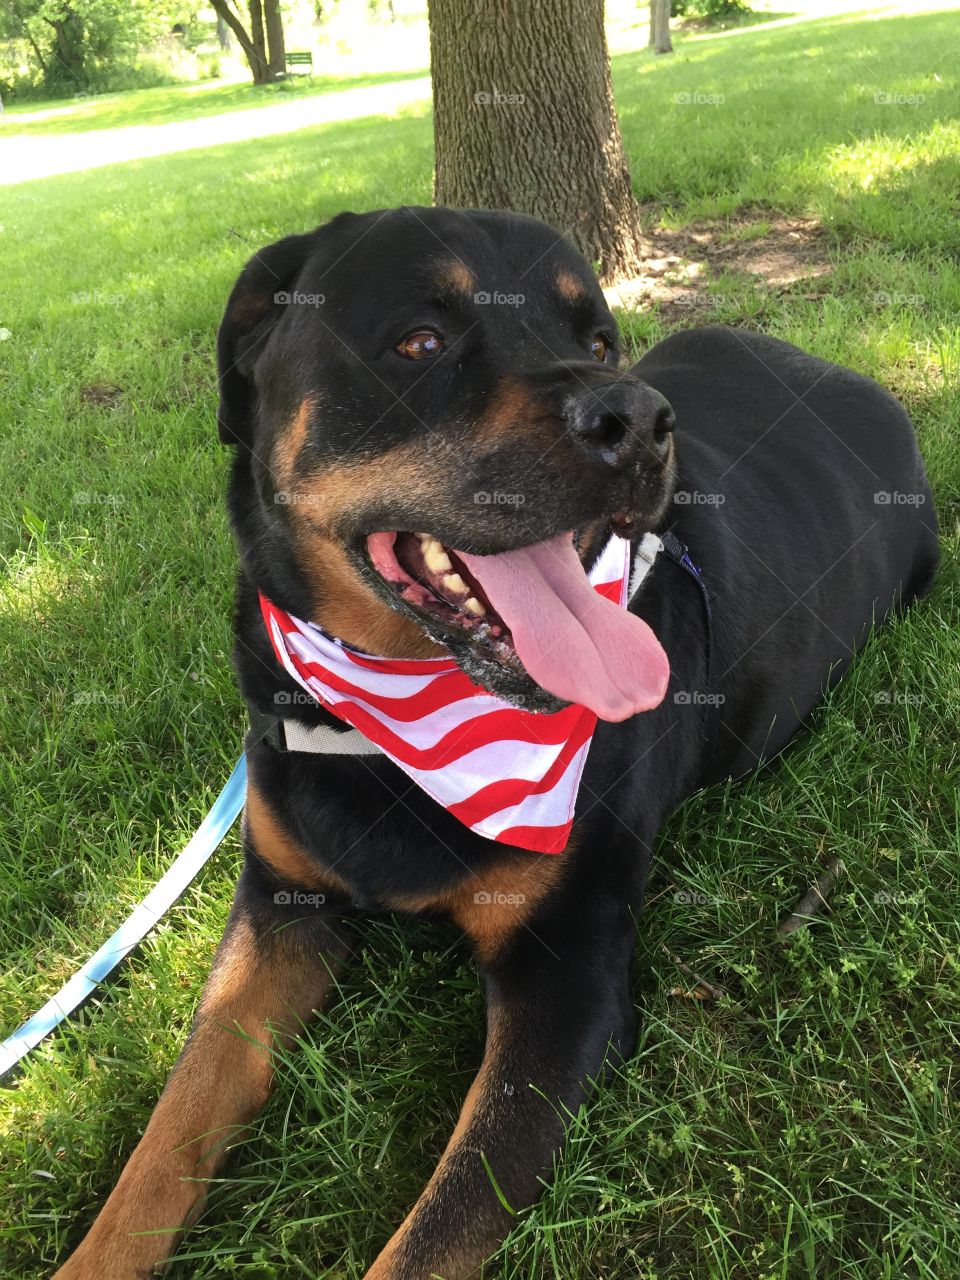 My Rottweiler relaxing with me in the park 